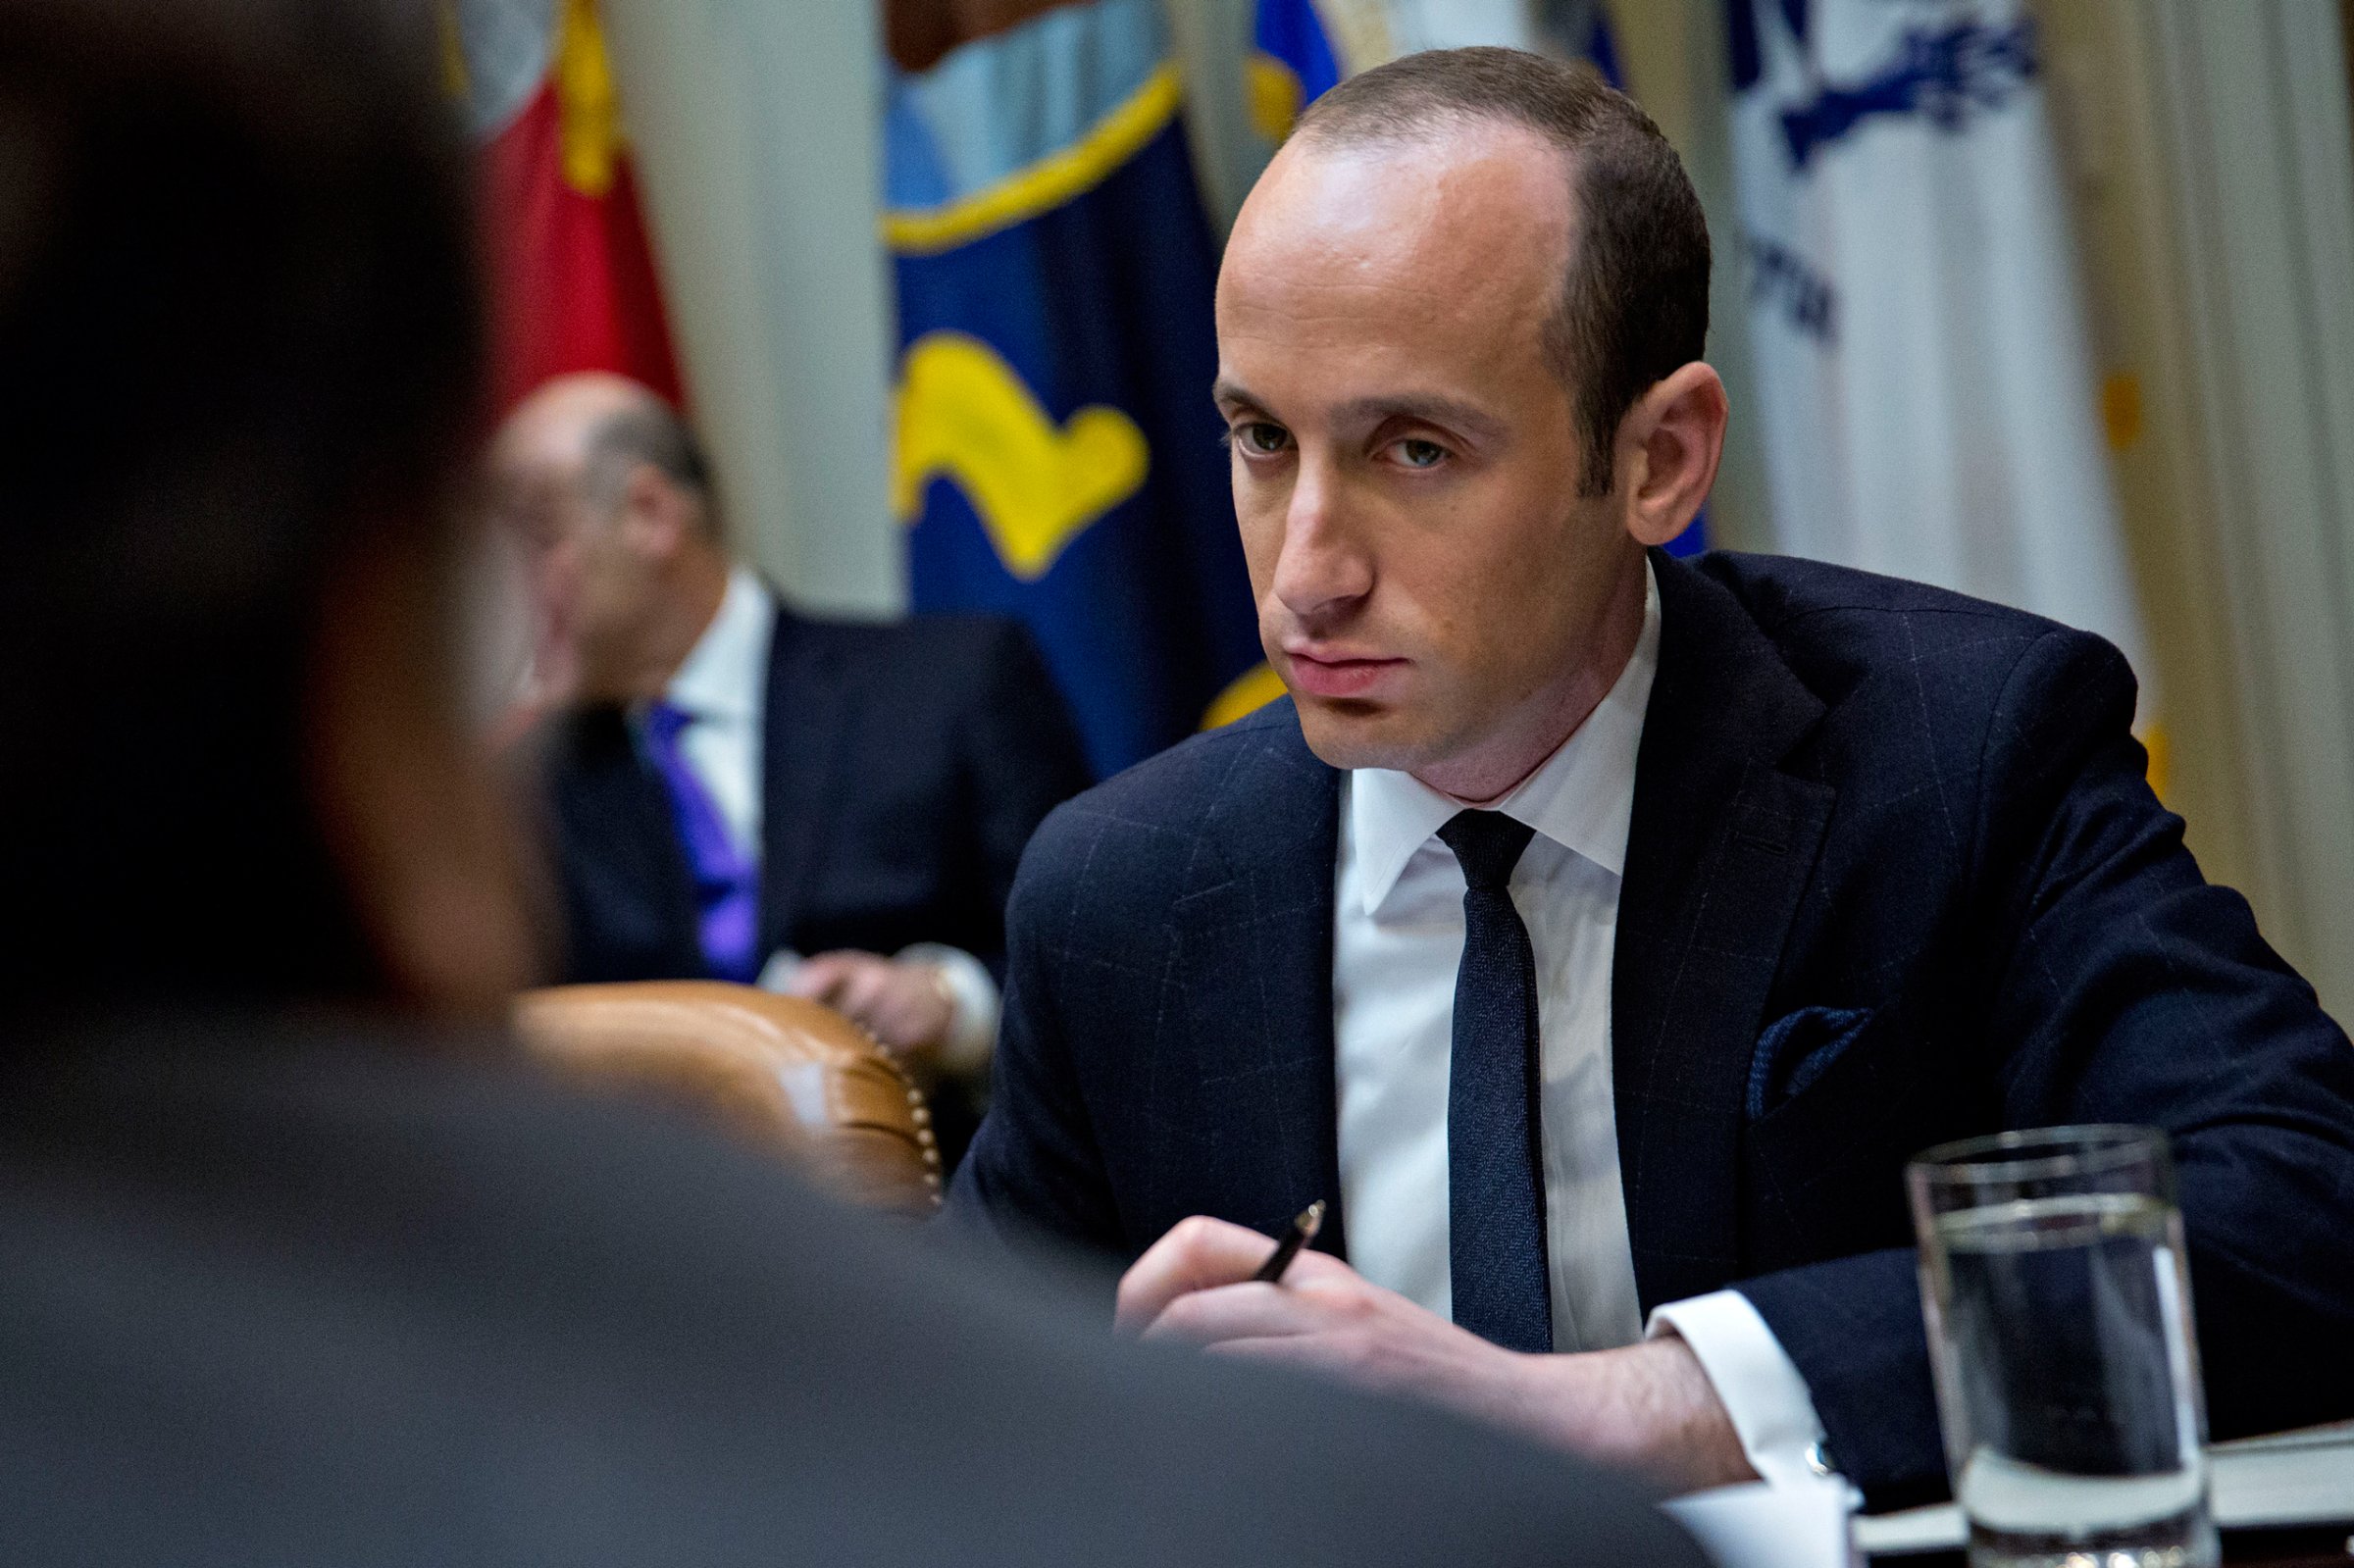 Stephen Miller, White House senior advisor for policy, right, listens as Roger Campos, with the Minority Business Roundtable, during a meeting of small business leaders with U.S. President Donald Trump, not pictured, in the Roosevelt Room of the White House in Washington, D.C., U.S., on Monday, Jan. 30, 2017. Trump defended the immigration clampdown that sparked a global backlash over the weekend by blaming the confusion at airports on protesters and on a computer outage at Delta Air Lines Inc. that caused flight cancellations. Credit: Andrew Harrer / Pool via CNP - NO WIRE SERVICE - Photo by: Andrew Harrer/picture-alliance/dpa/AP Images